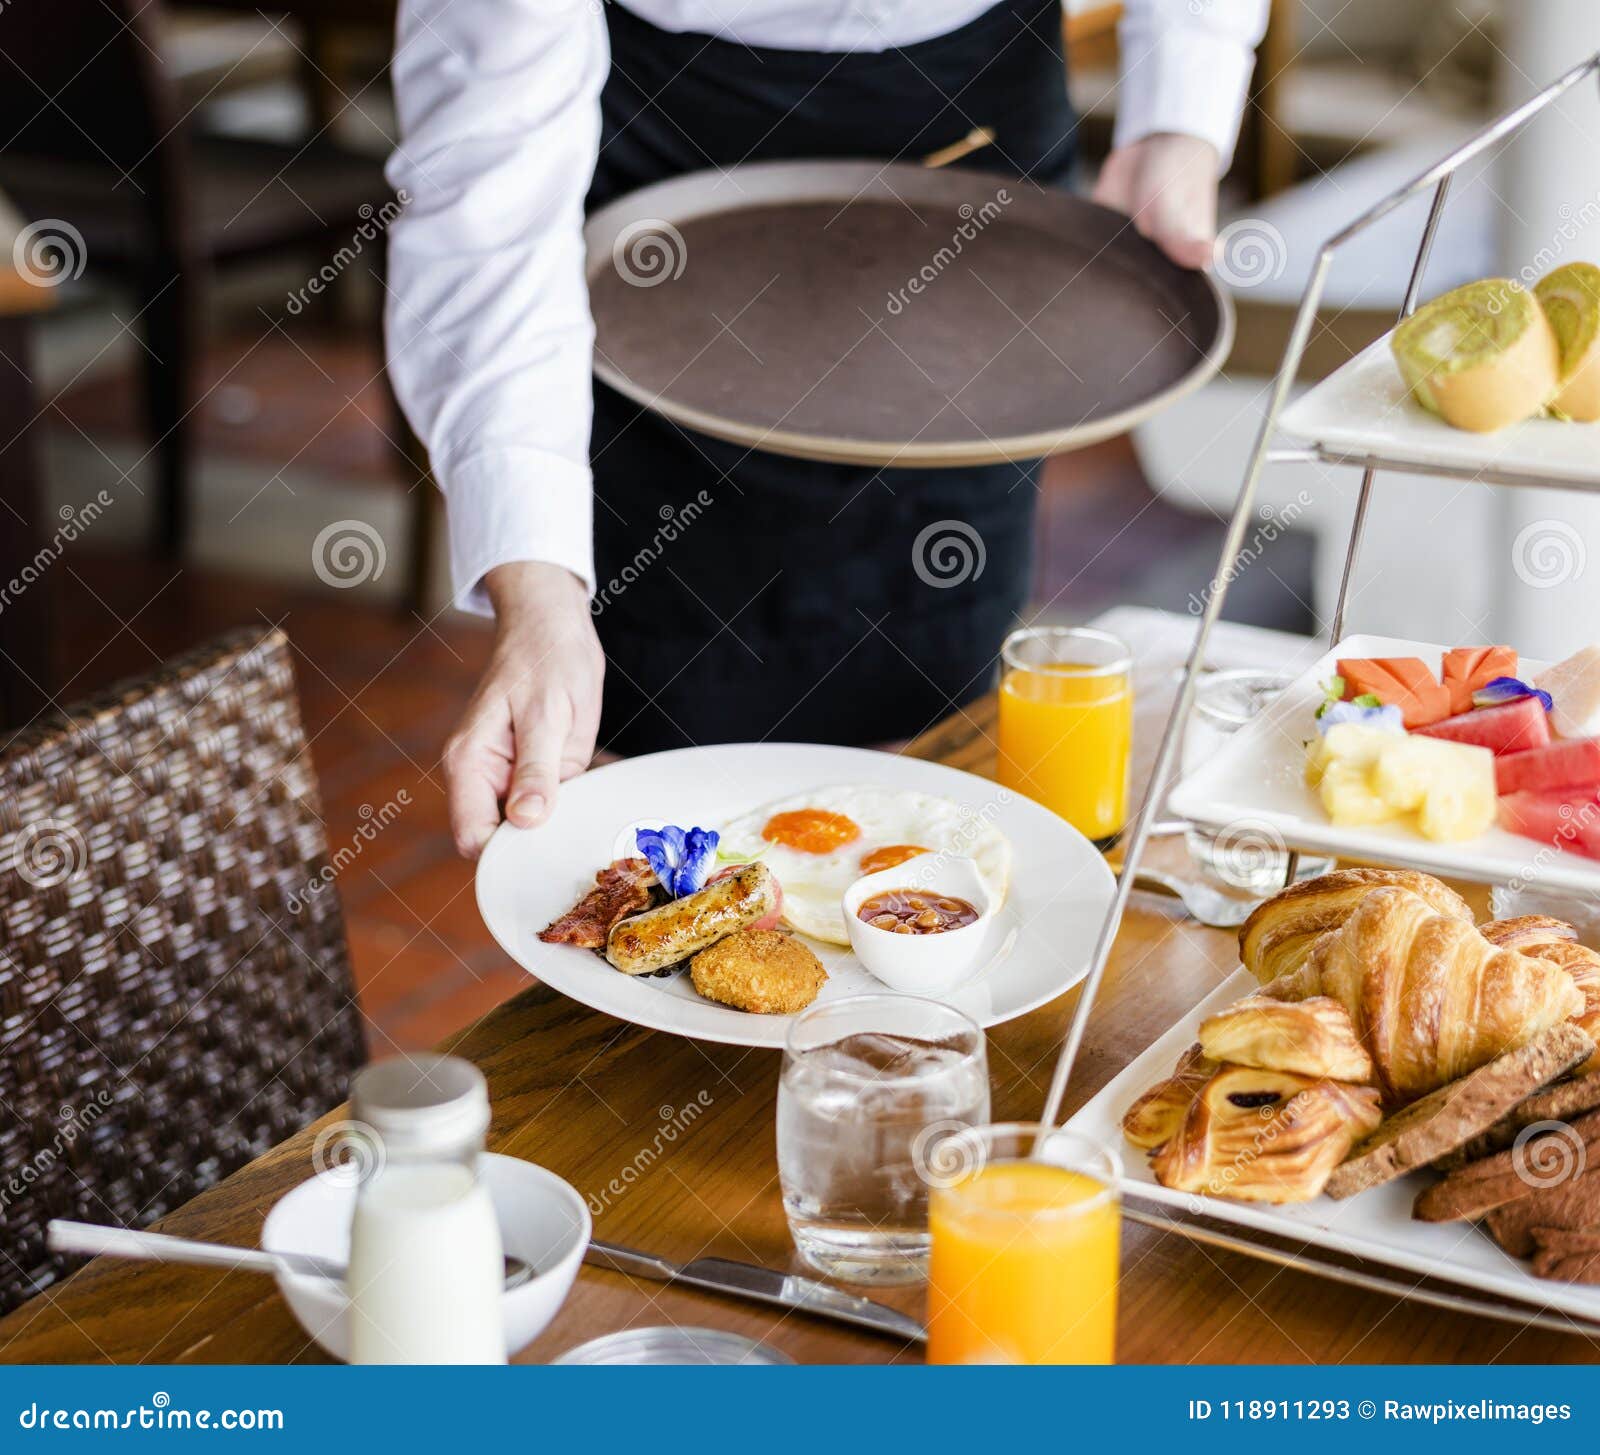 Waitress Serving Breakfast at a Restaurant Stock Image - Image of